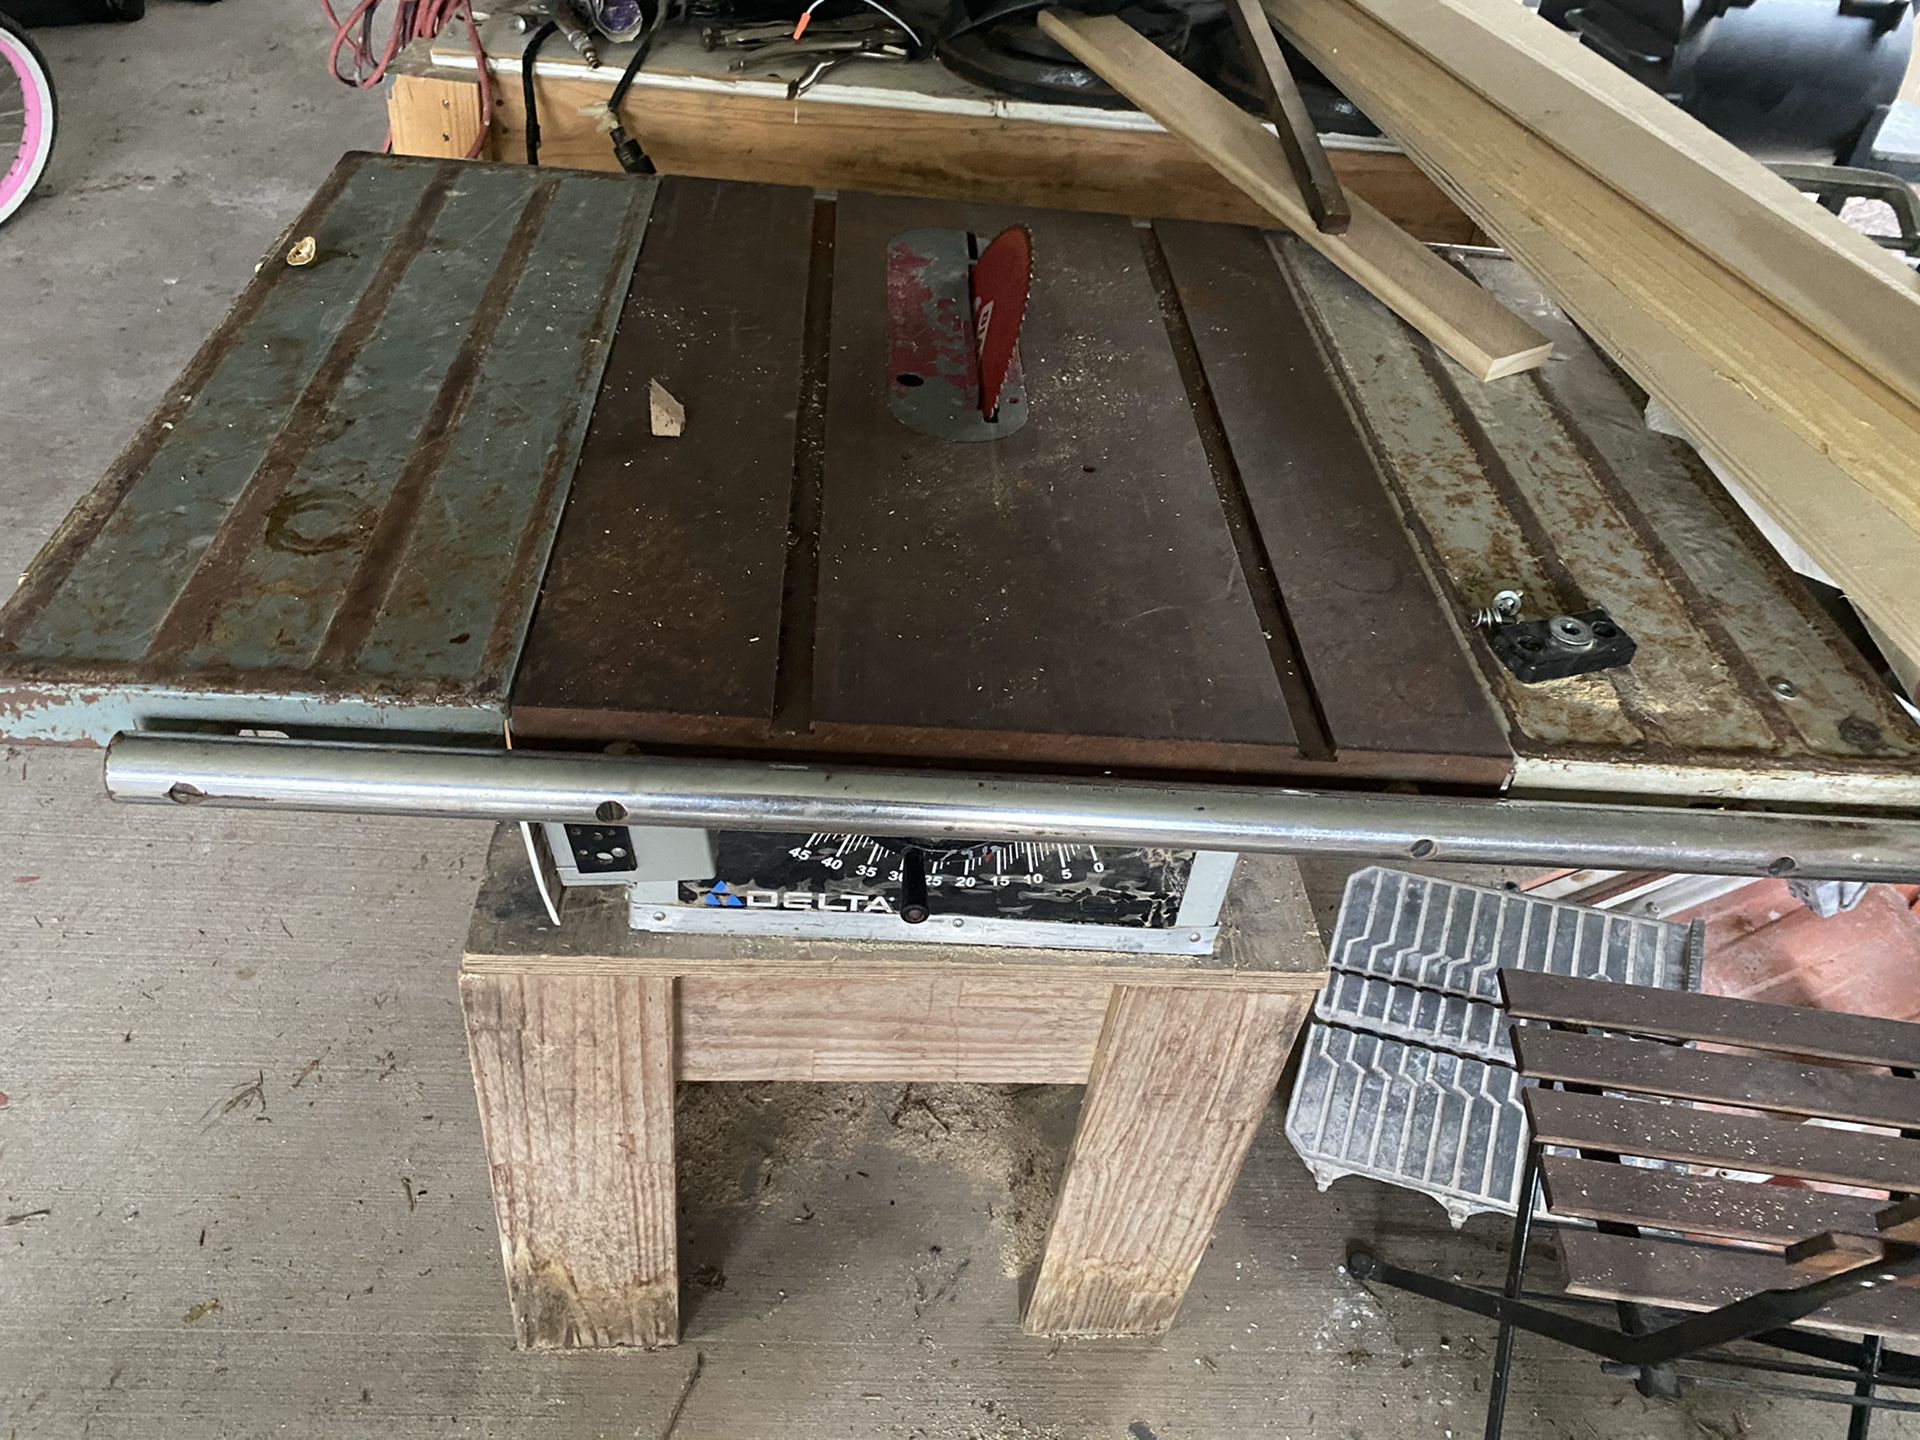 Table saw(delta)